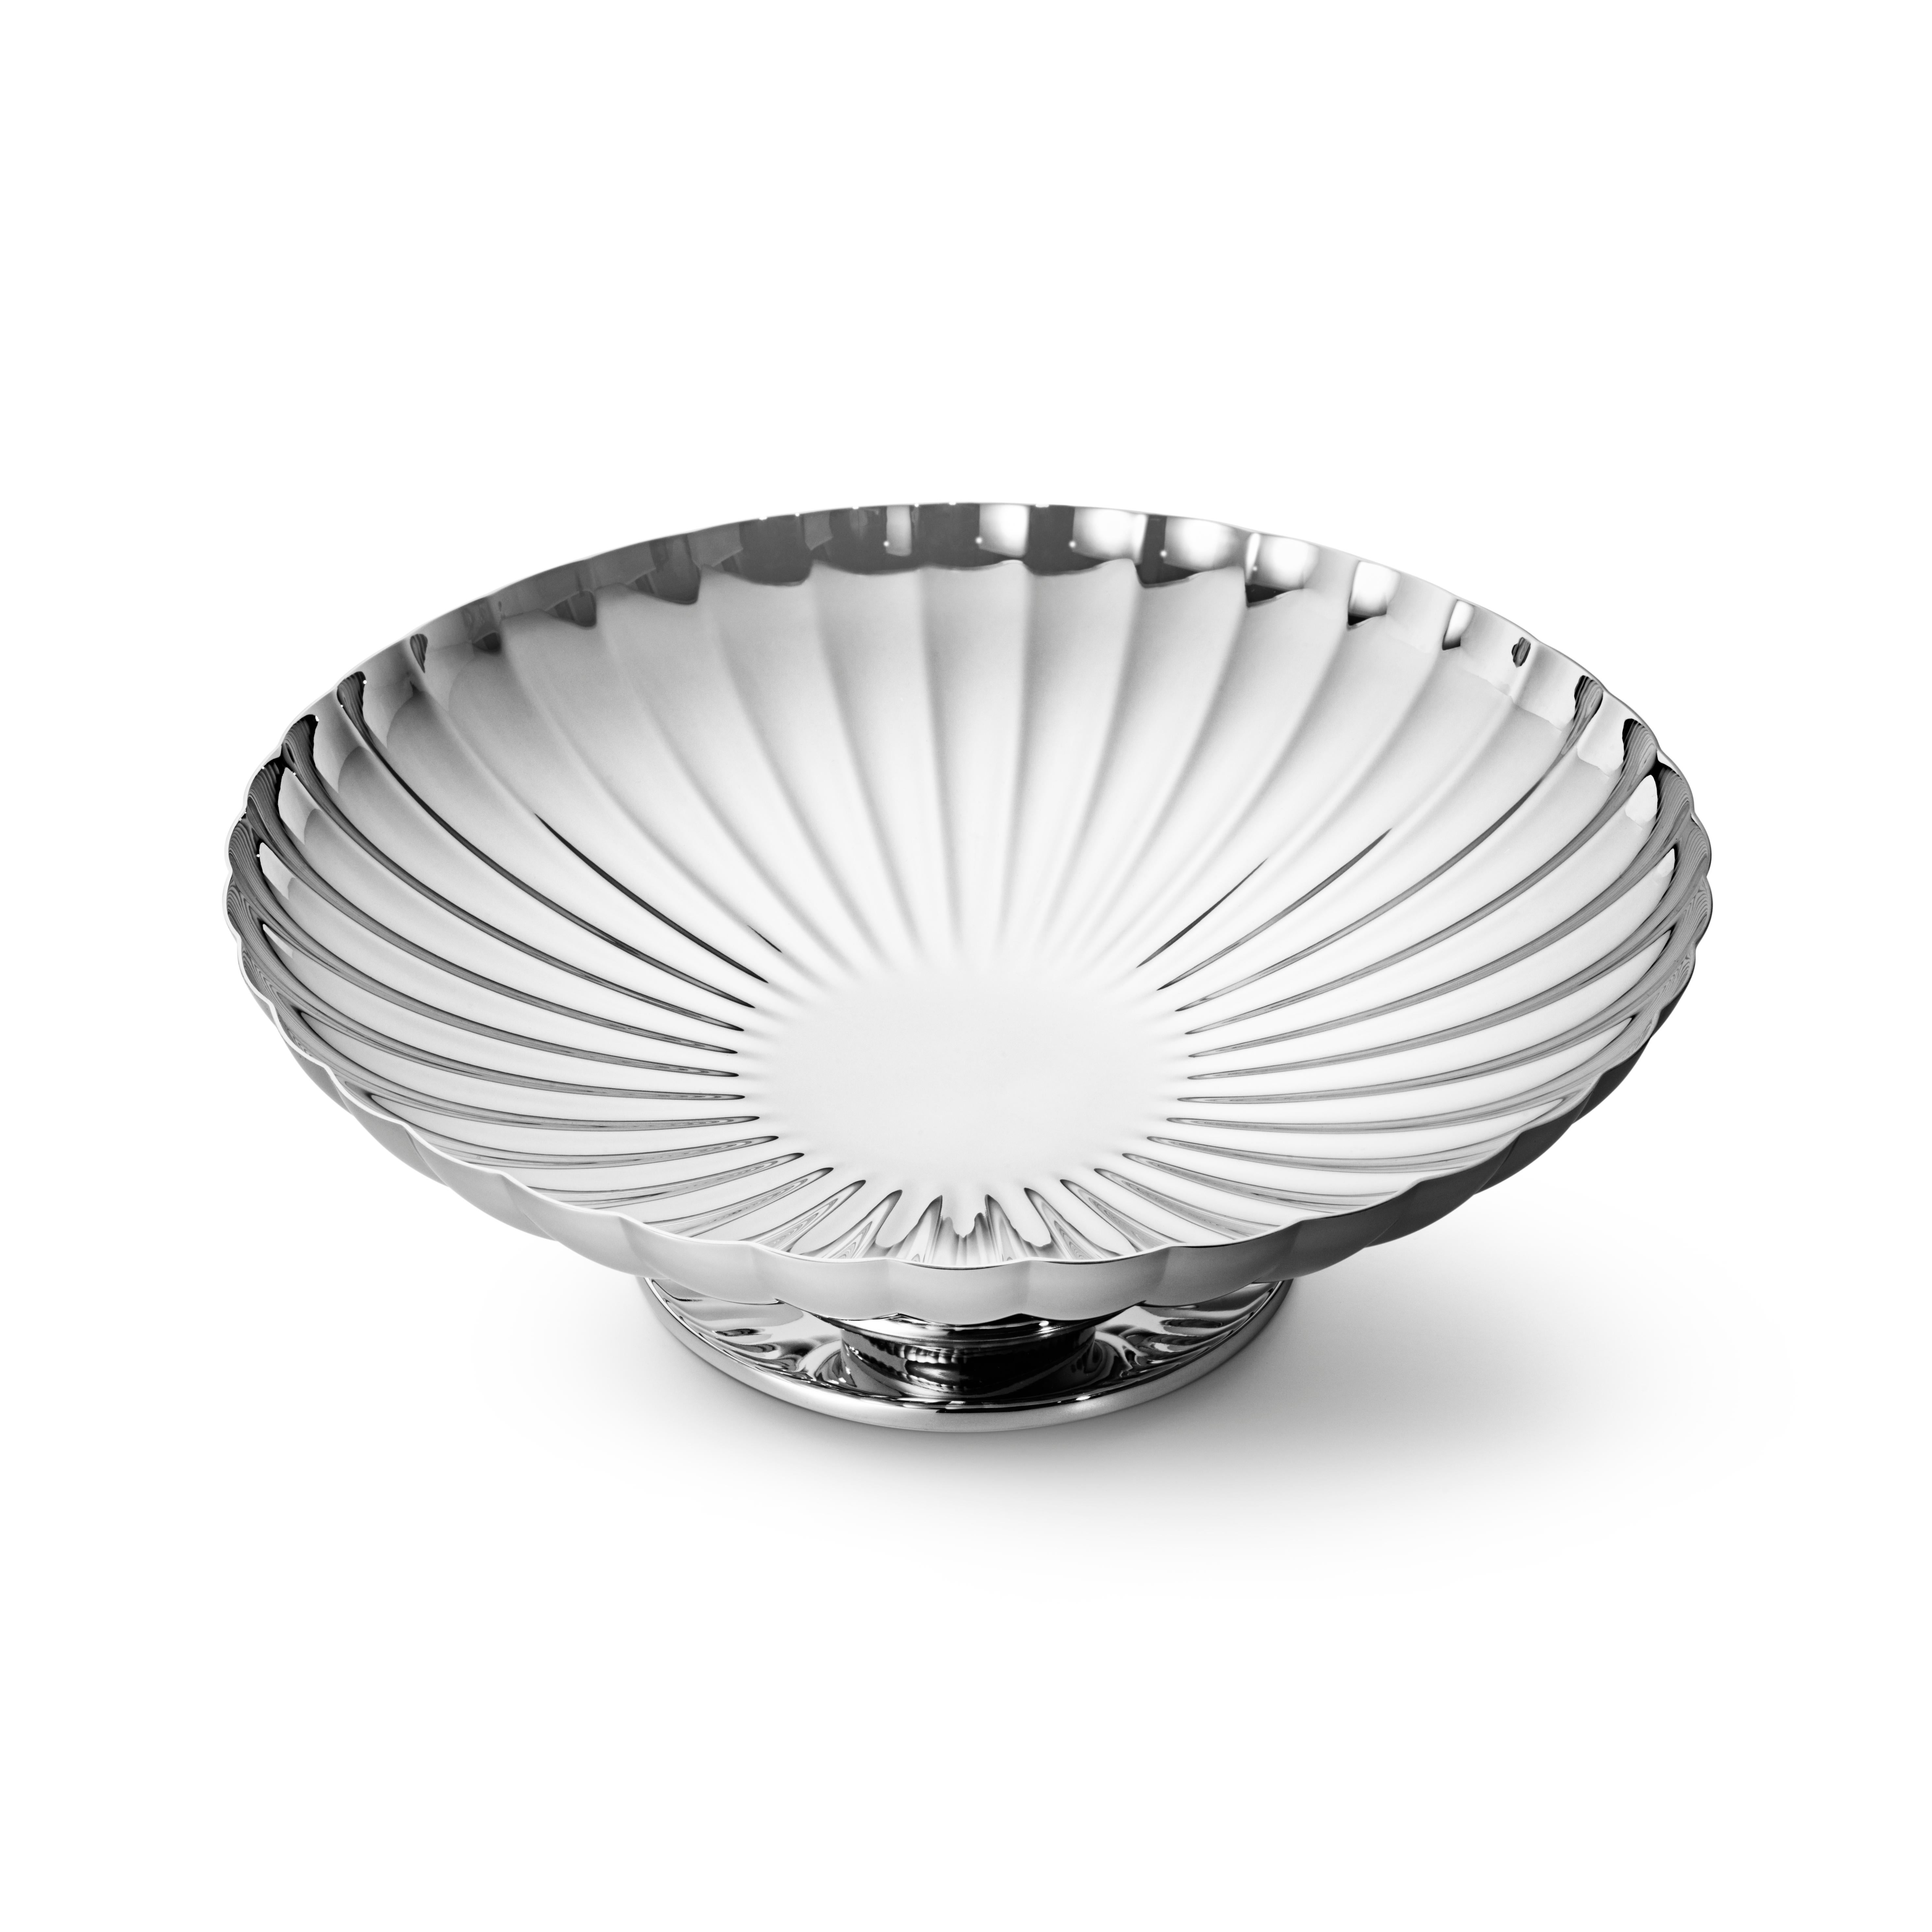 Modern Georg Jensen Bernadotte Dish on Stand in Stainless Steel Finish by Grethe Meyer For Sale